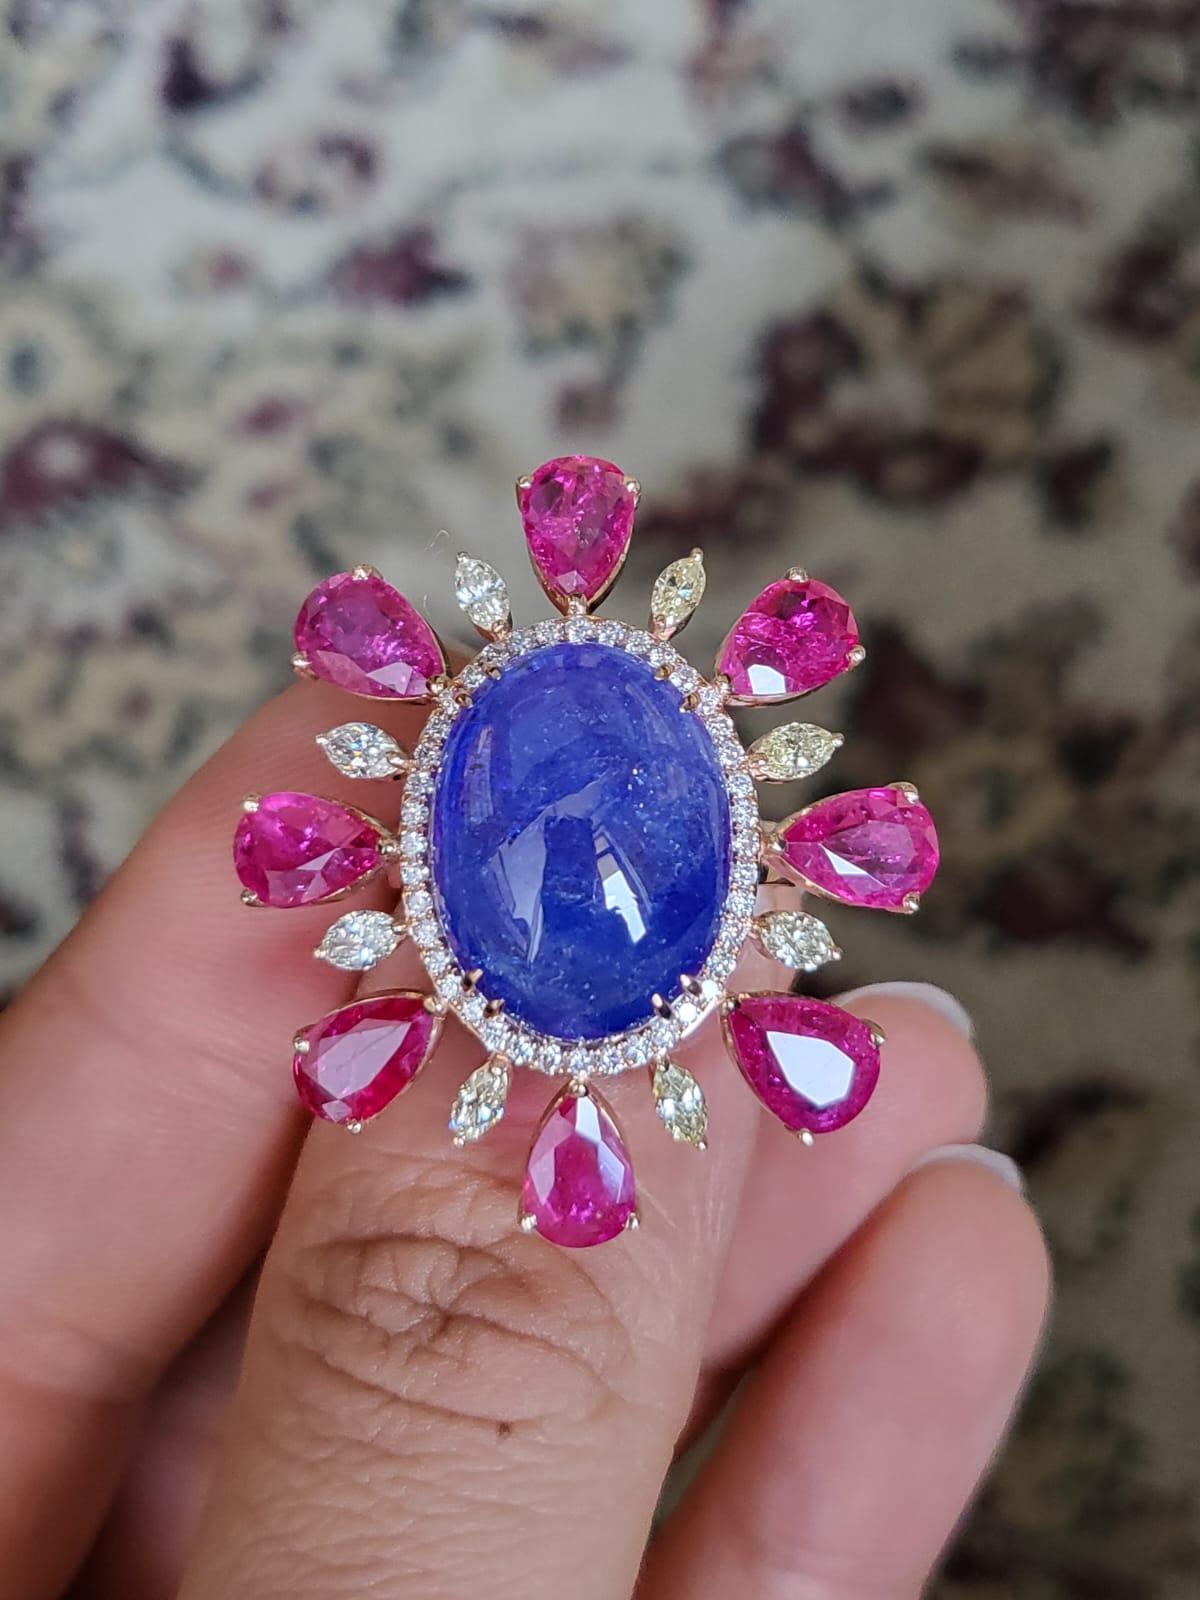 A very gorgeous, one of a kind and modern, Tanzanite & Ruby Cocktail Ring set in 18K Rose Gold & Diamonds. The weight of the Tanzanite Cabochon is 15.48 carats. The Tanzanite is responsibly sourced from Tanzania. The weigh of the pear shaped Rubies